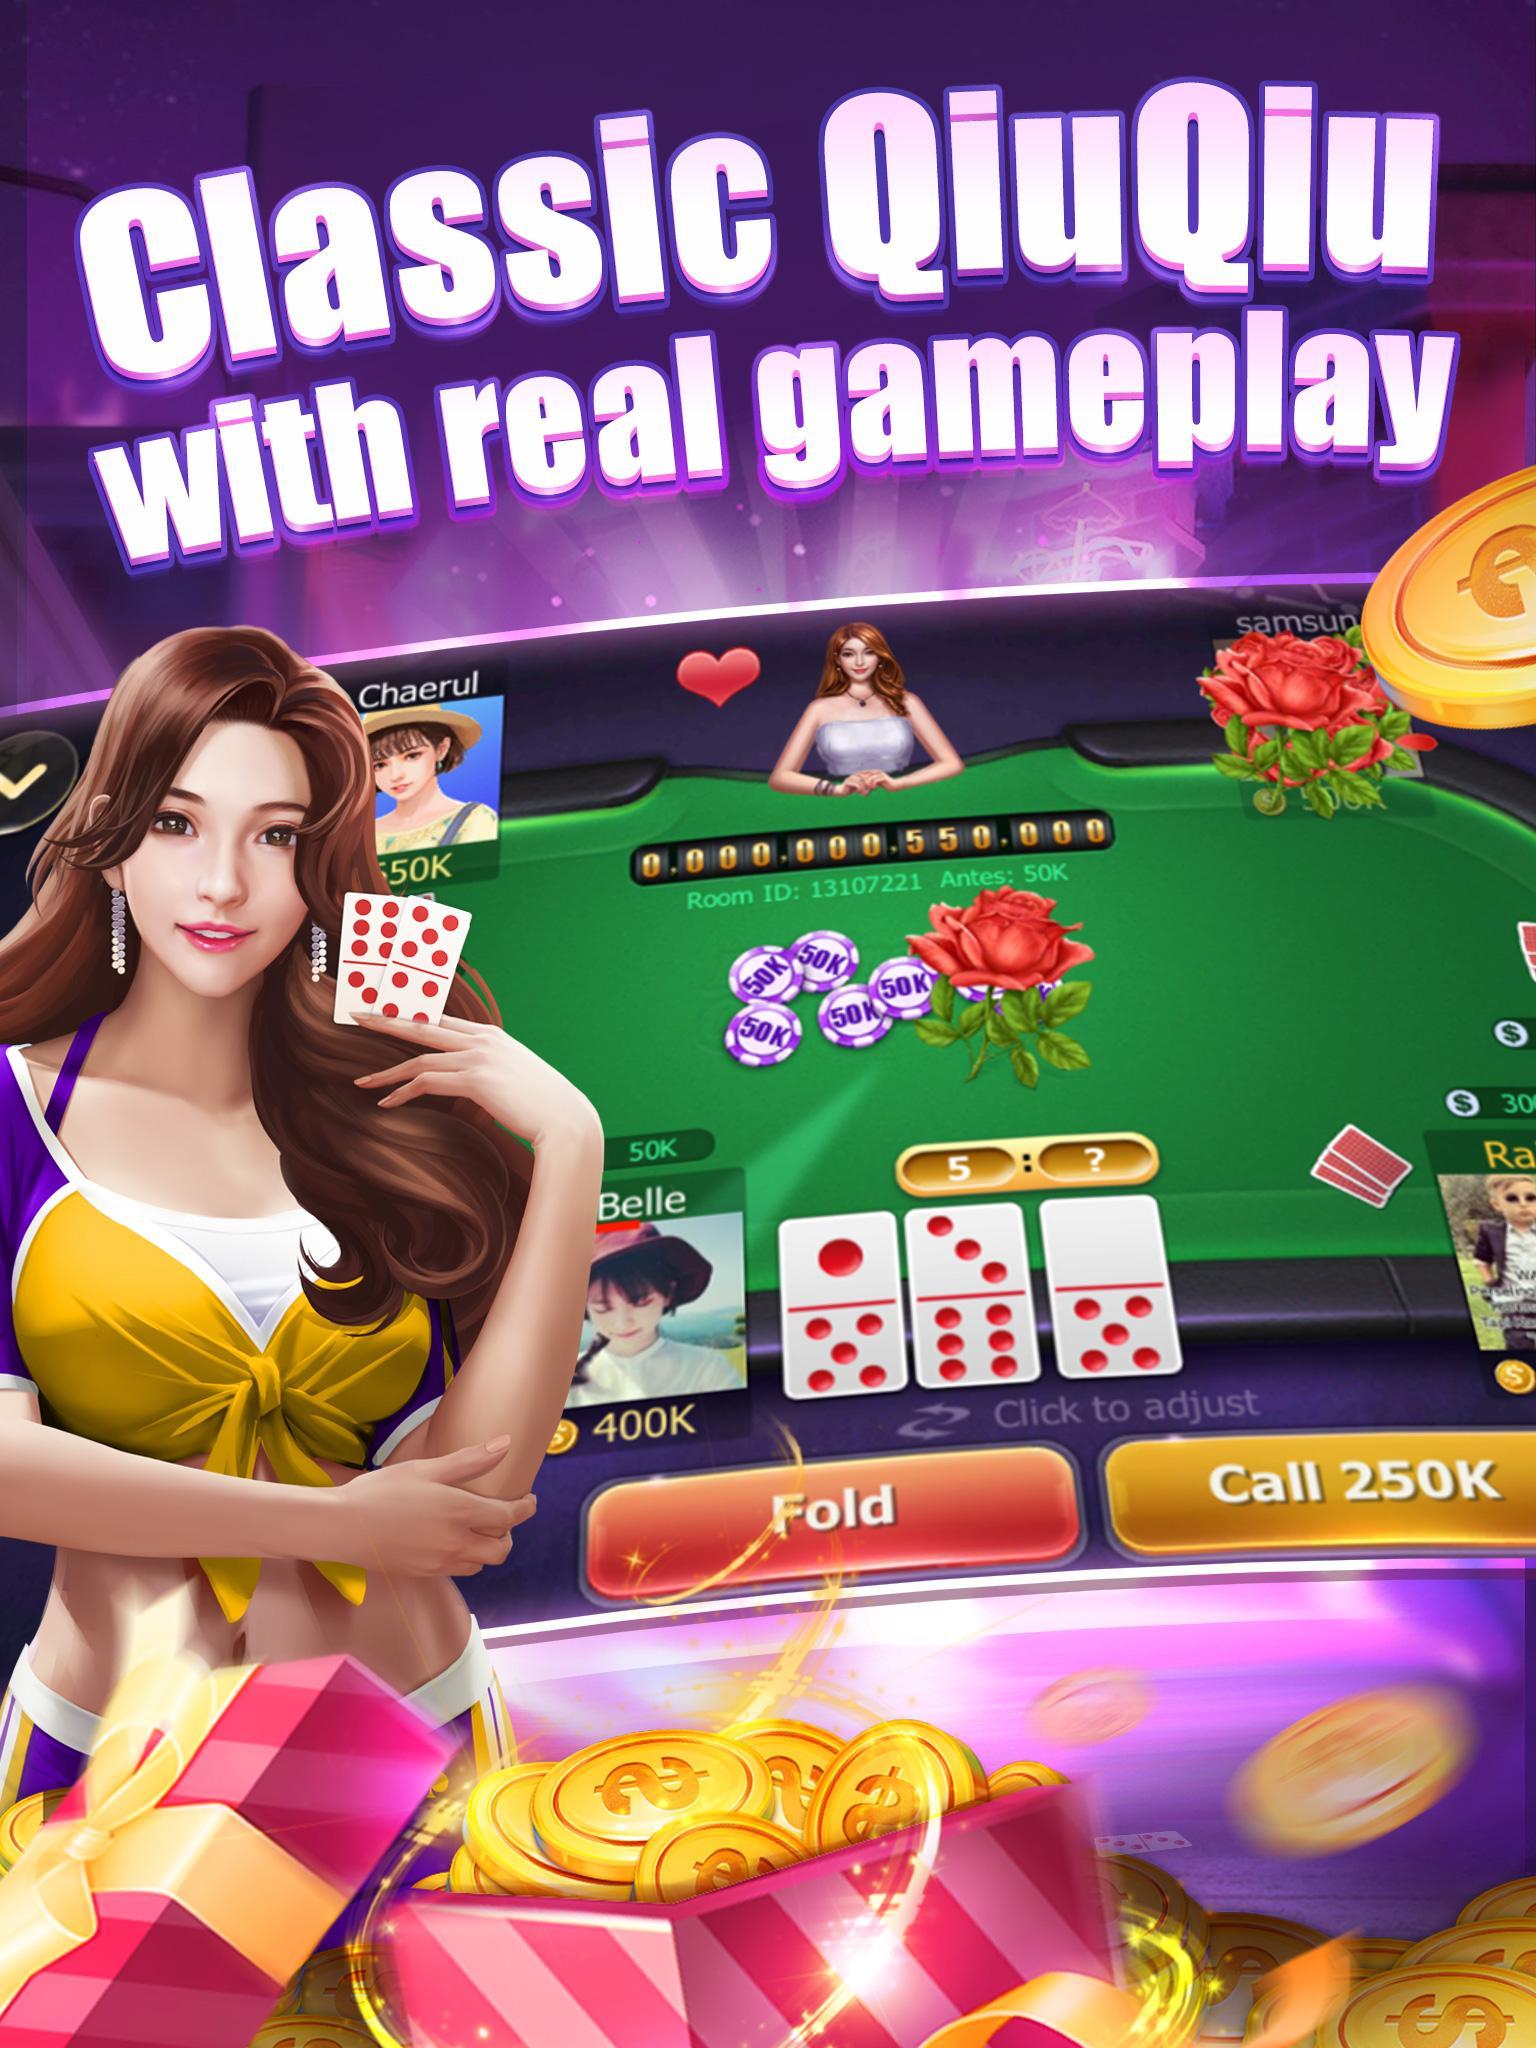 Read more about the article Download Game Domino Qiu Qiu Online Untuk Android, Gaple Capsa Susun: QiuQiu(99)/Texas Remi Online<div class="yasr-vv-stars-title-container"><div class='yasr-stars-title yasr-rater-stars'
                          id='yasr-visitor-votes-readonly-rater-2d165e75a0706'
                          data-rating='0'
                          data-rater-starsize='16'
                          data-rater-postid='2298'
                          data-rater-readonly='true'
                          data-readonly-attribute='true'
                      ></div><span class='yasr-stars-title-average'>0 (0)</span></div>